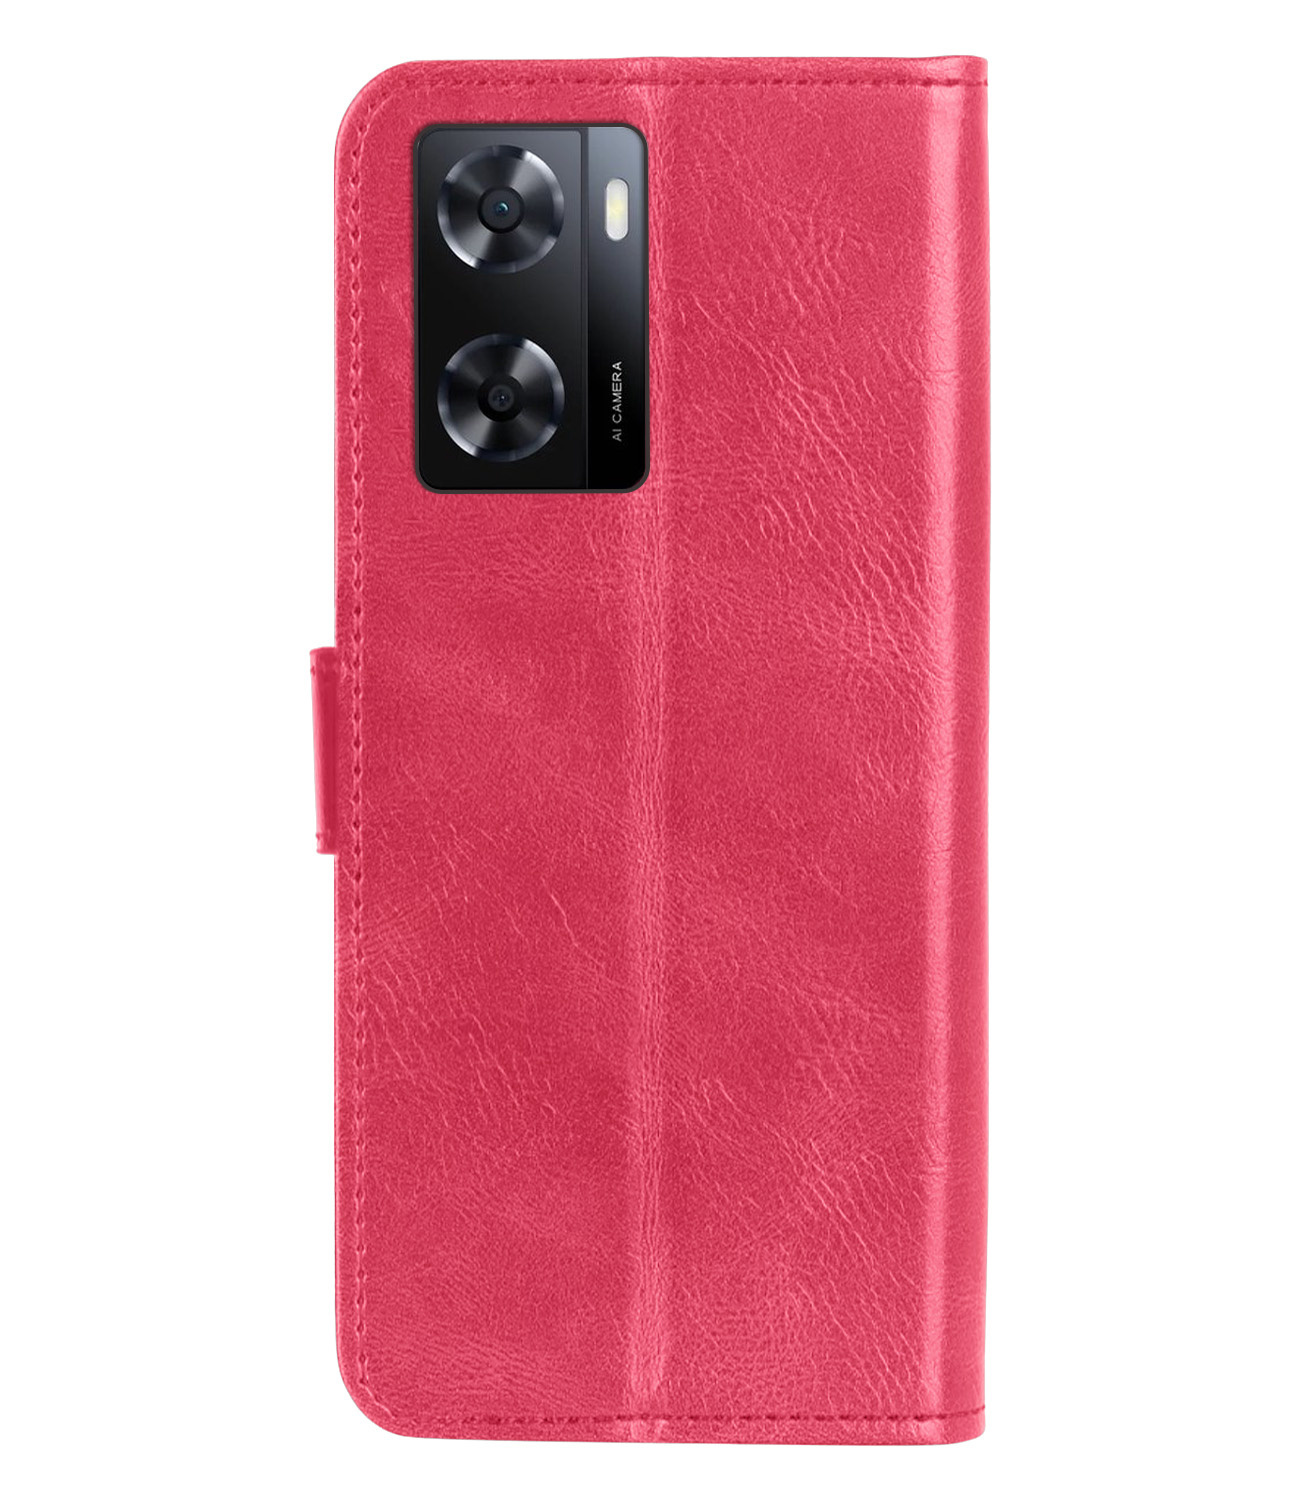 Nomfy OPPO A57s Hoes Bookcase Flipcase Book Cover Met 2x Screenprotector - OPPO A57s Hoesje Book Case - Donker Roze